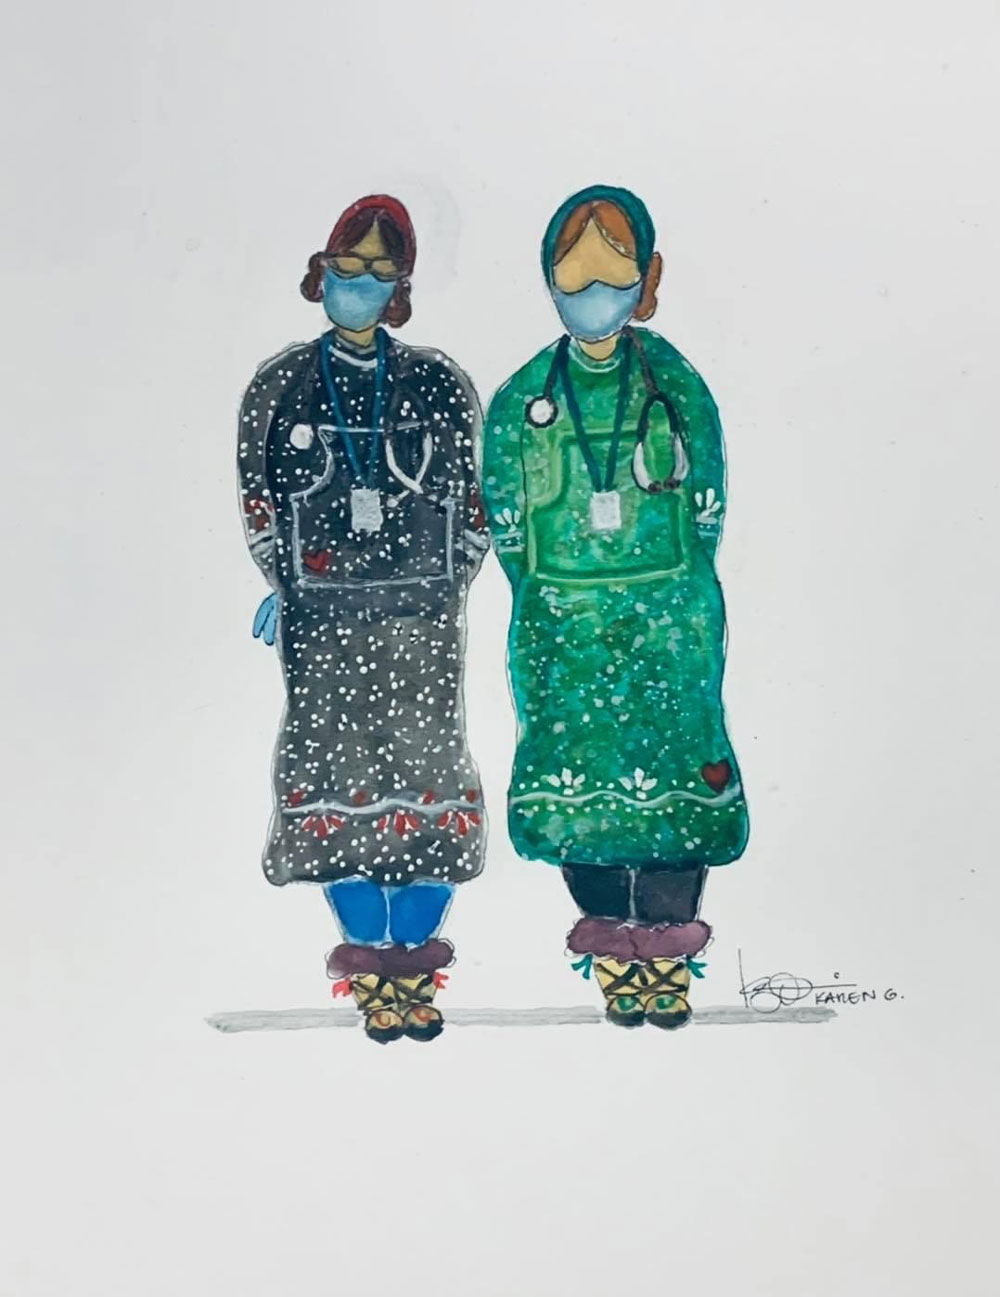 Karen Garcia (Eben) is an Inupiaq watercolor artist from Anchorage. Many of her painting inspirations, however, come from childhood memories of days spent in Unalakleet, White Mountain, and Shaktoolik with her family.